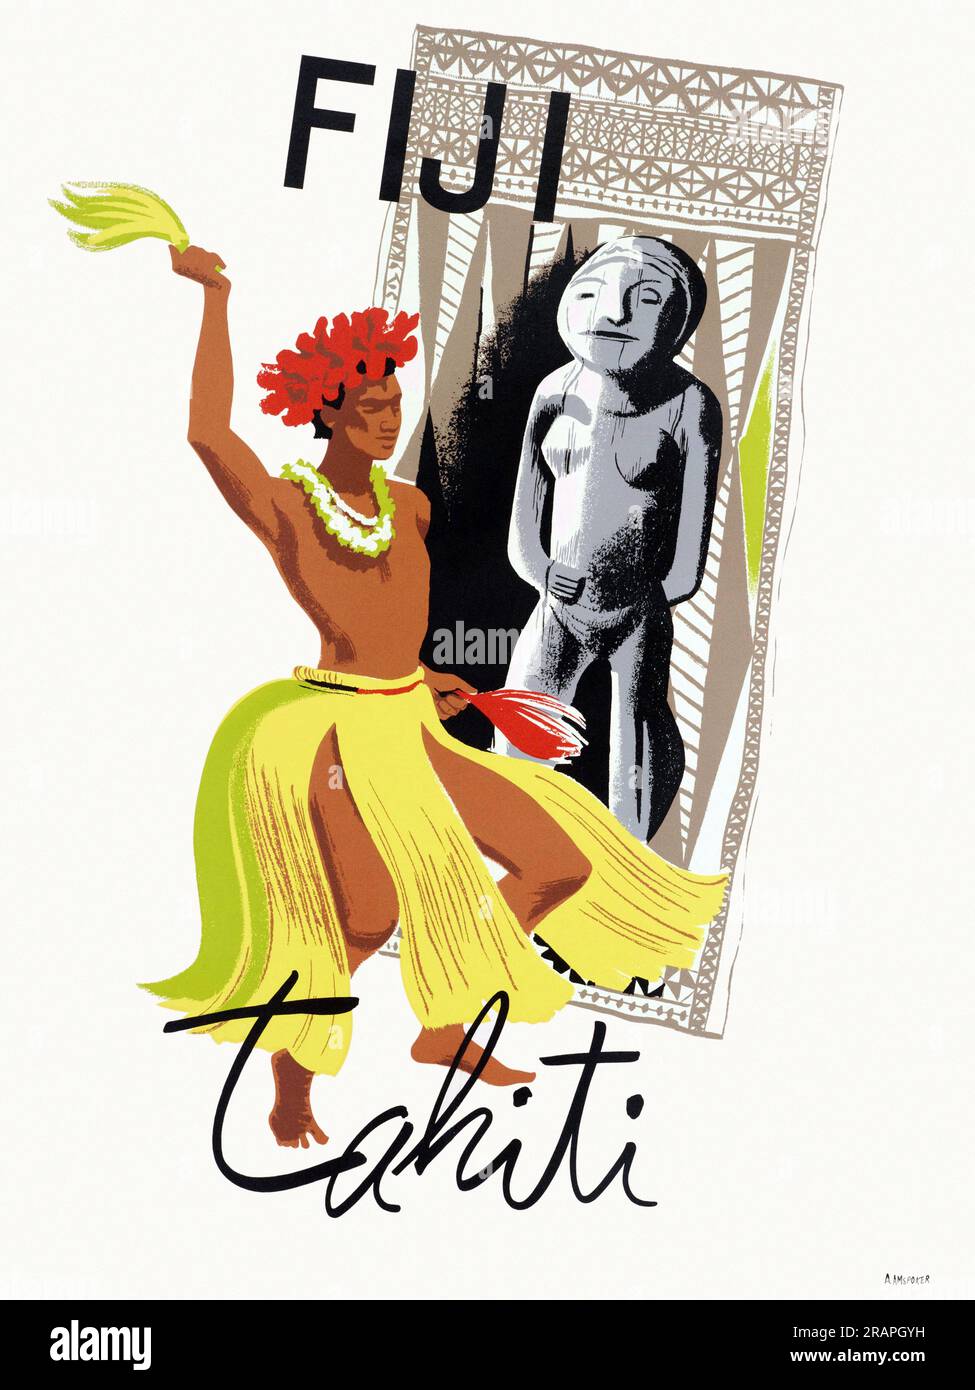 Fiji. Tahiti by Aaron Amspoker (dates unknown). Poster published in the 1950s in the USA. Stock Photo